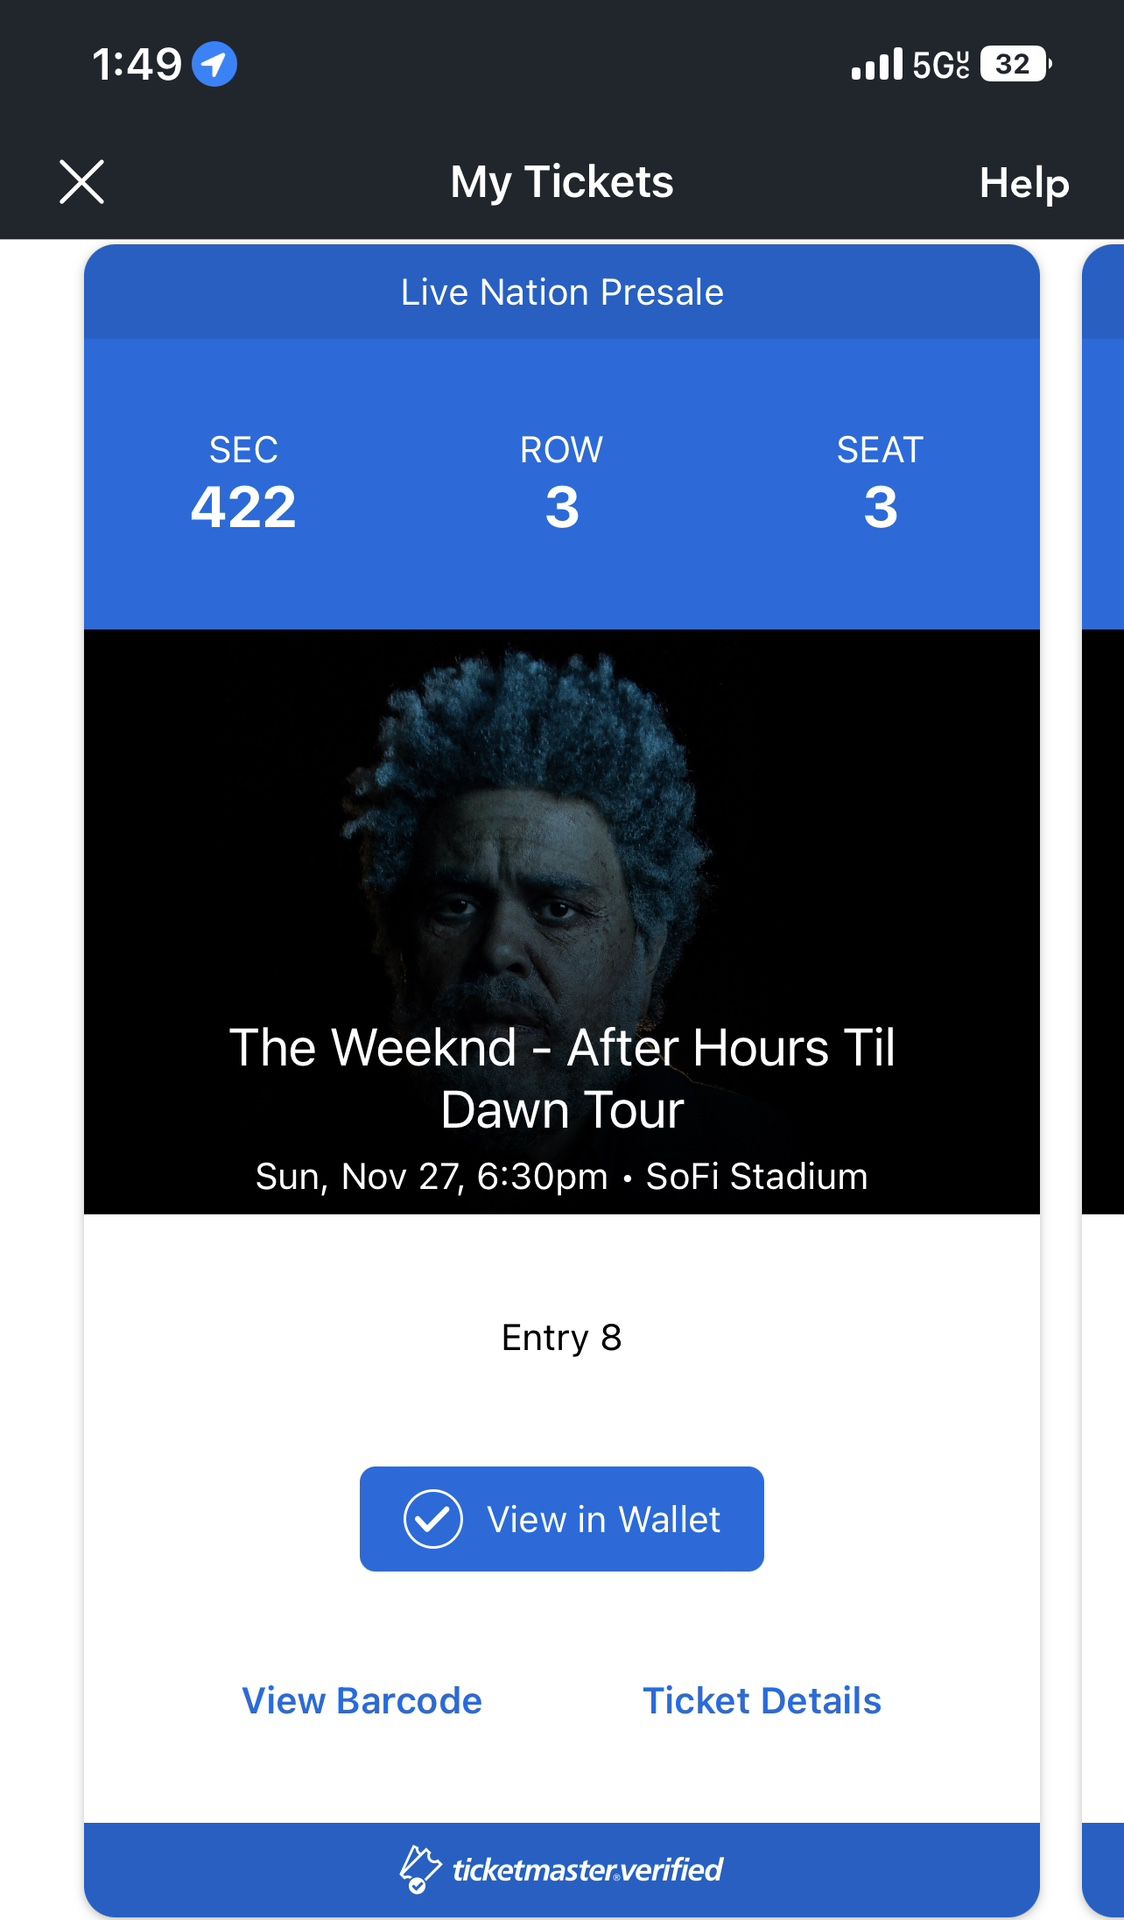 The weeknd after hours till dawn tour november 11/27 Sunday show, 2 tickets 